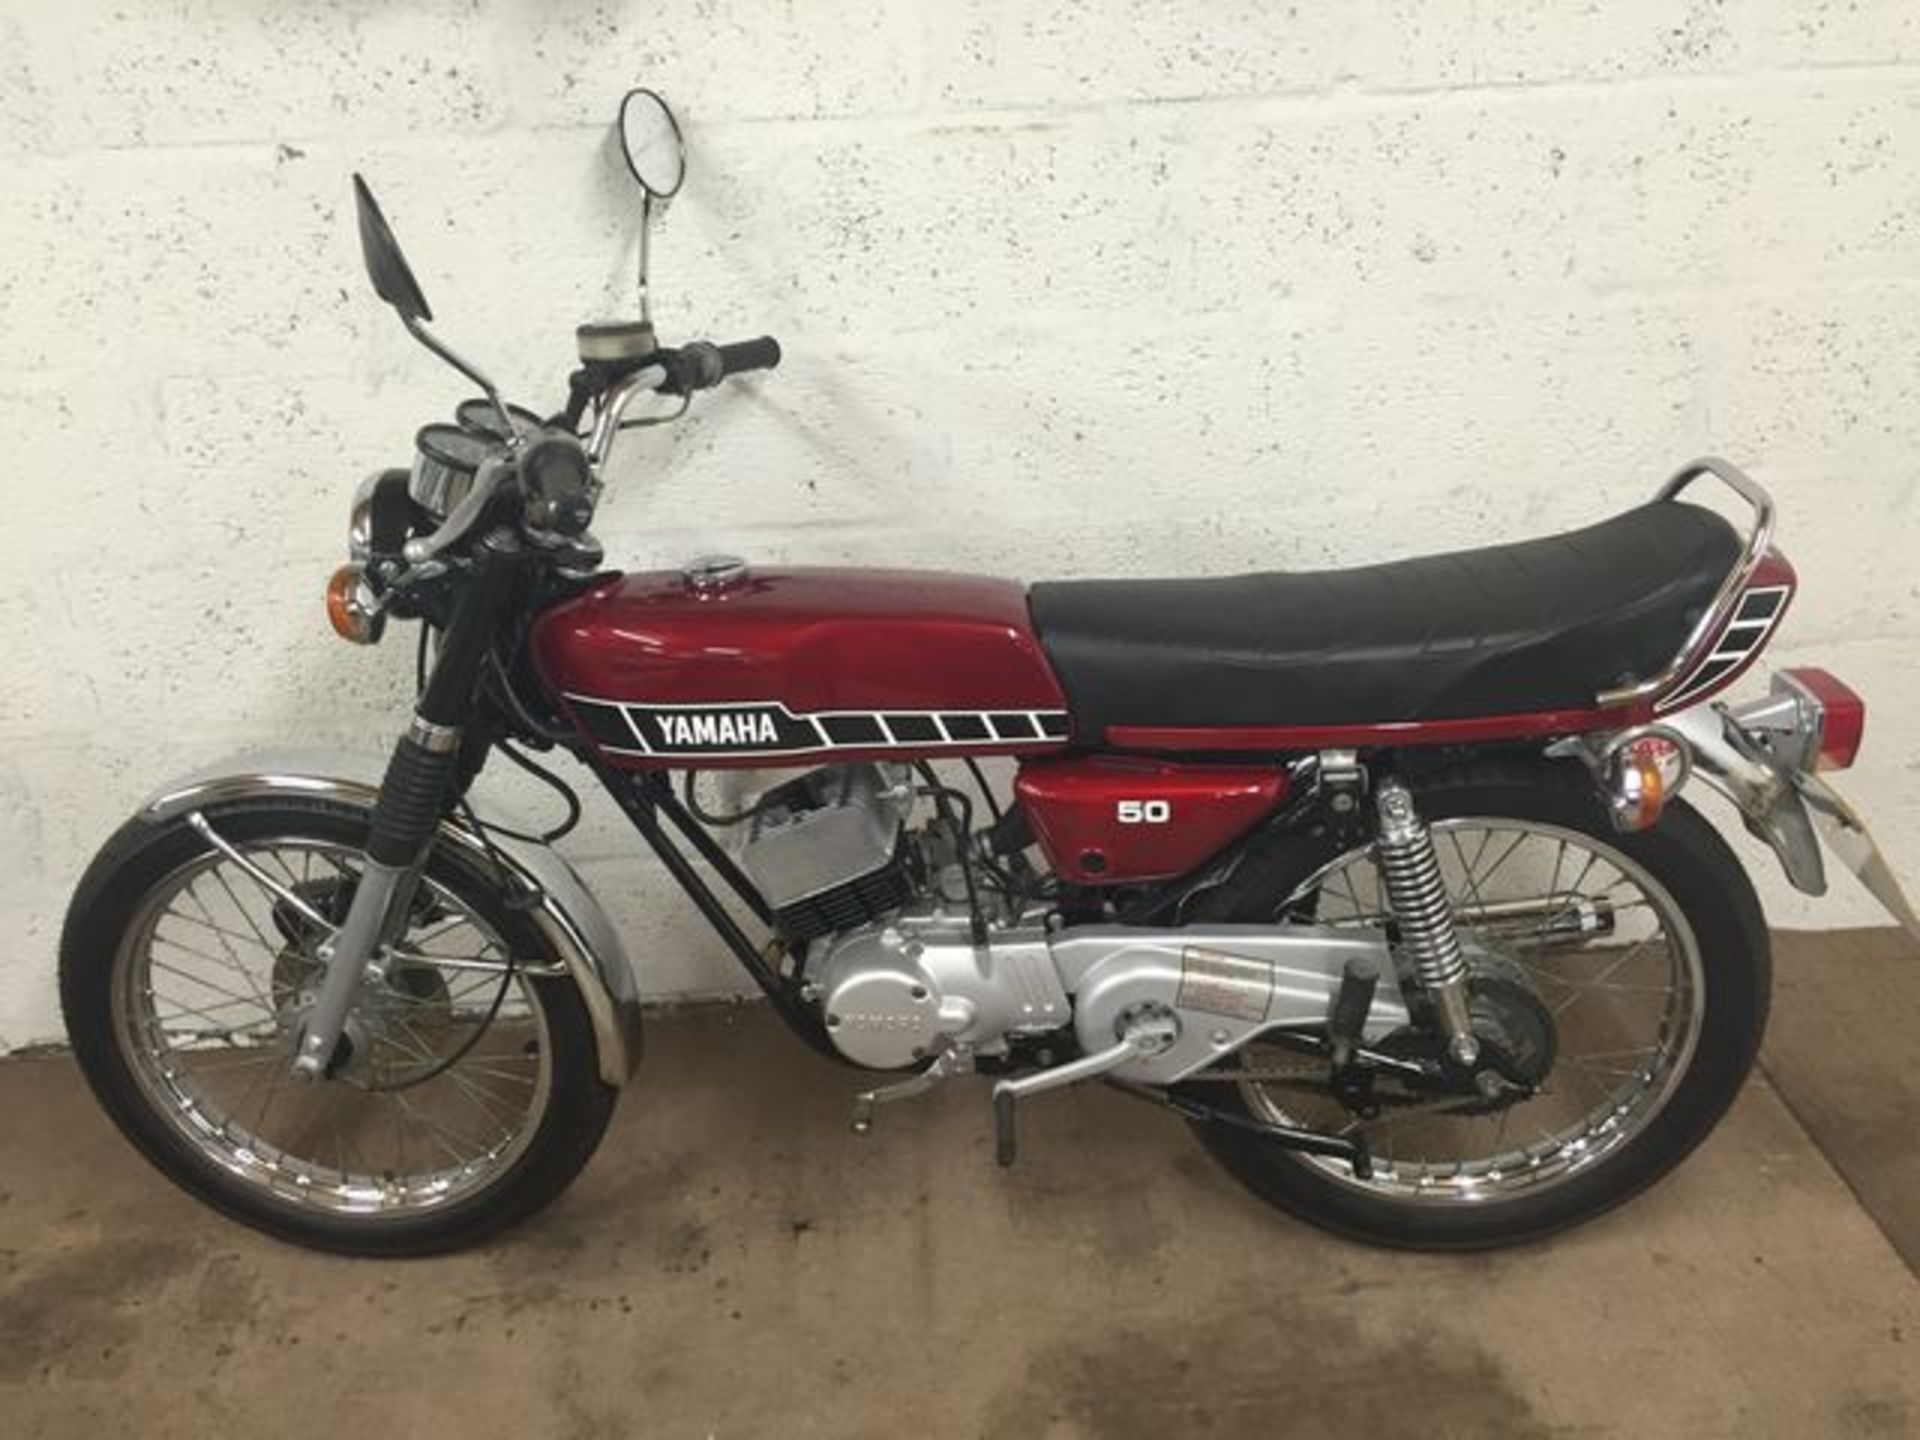 YAMAHA, RD50M - 49cc, Frame number 2L5004355 - this example is a French import registered in the - Image 2 of 7